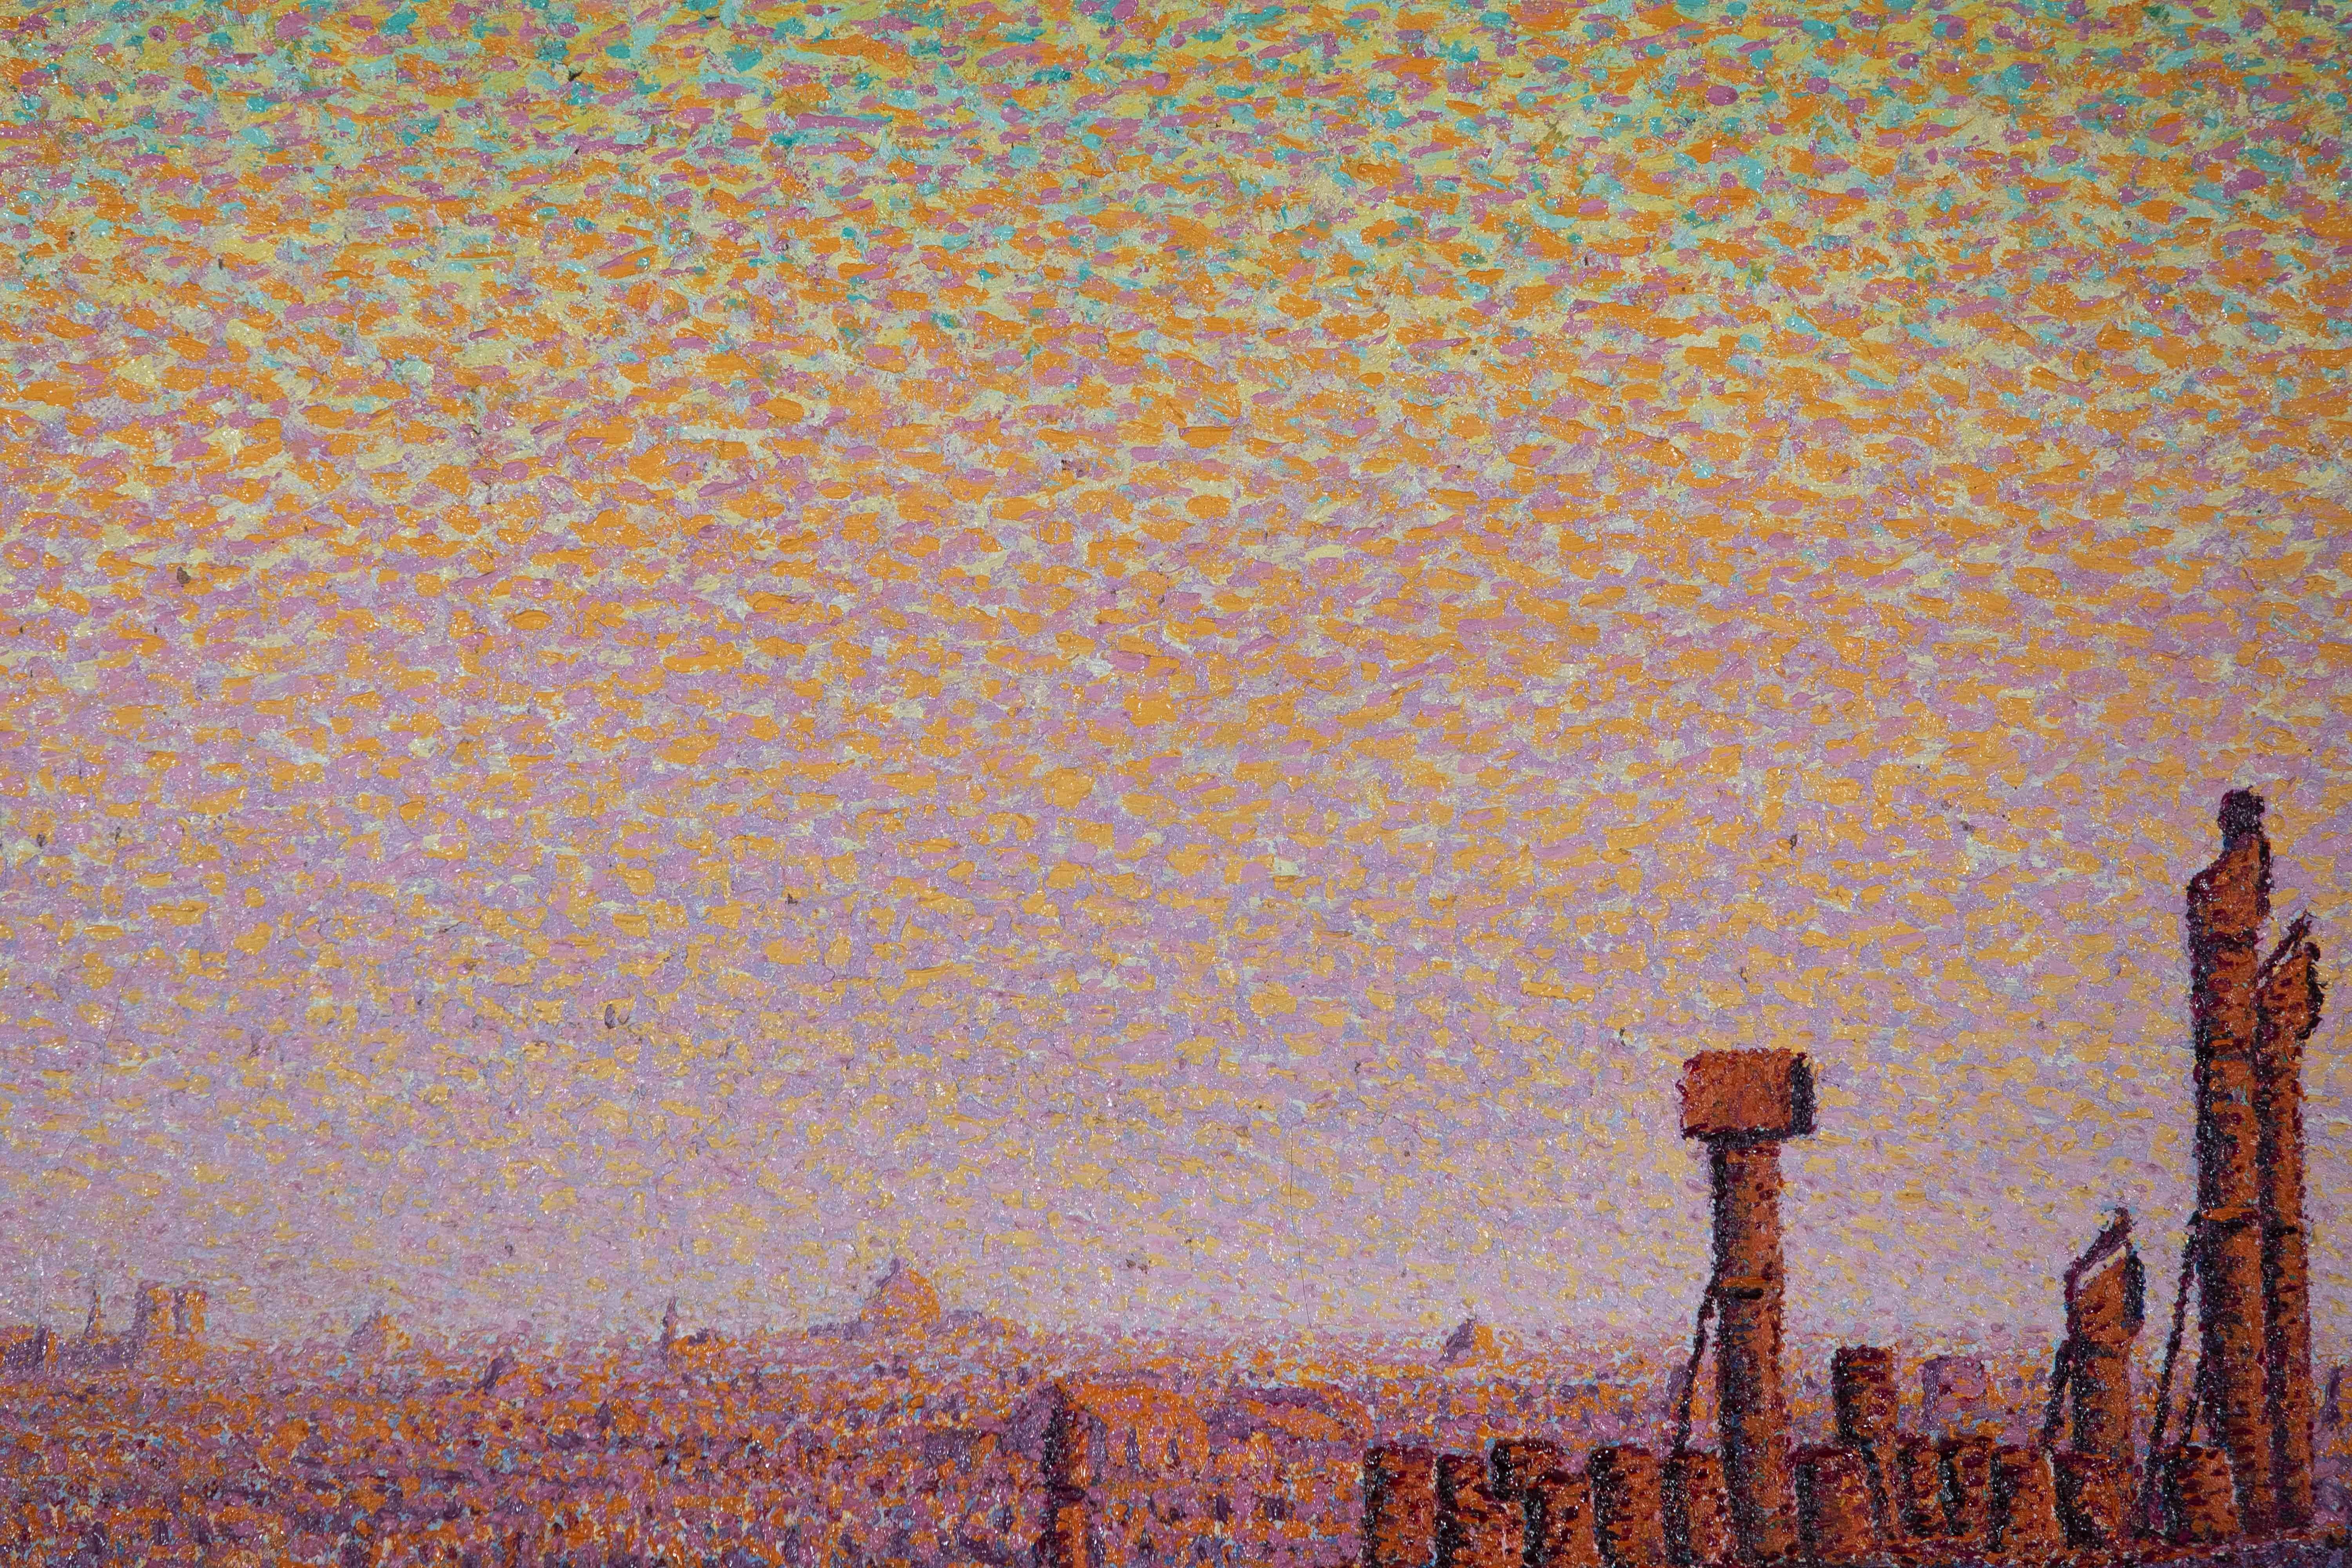 *PLEASE NOTE UK BUYERS WILL ONLY PAY 5% VAT ON THIS PURCHASE.

Les toits de Paris, coucher de soleil by Gustave Cariot (1872-1950)
Oil on canvas
47 x 62.6 cm (18 ¹/₂ x 24 ⁵/₈ inches)
Signed and dated lower right, G. Cariot 1899

This work is